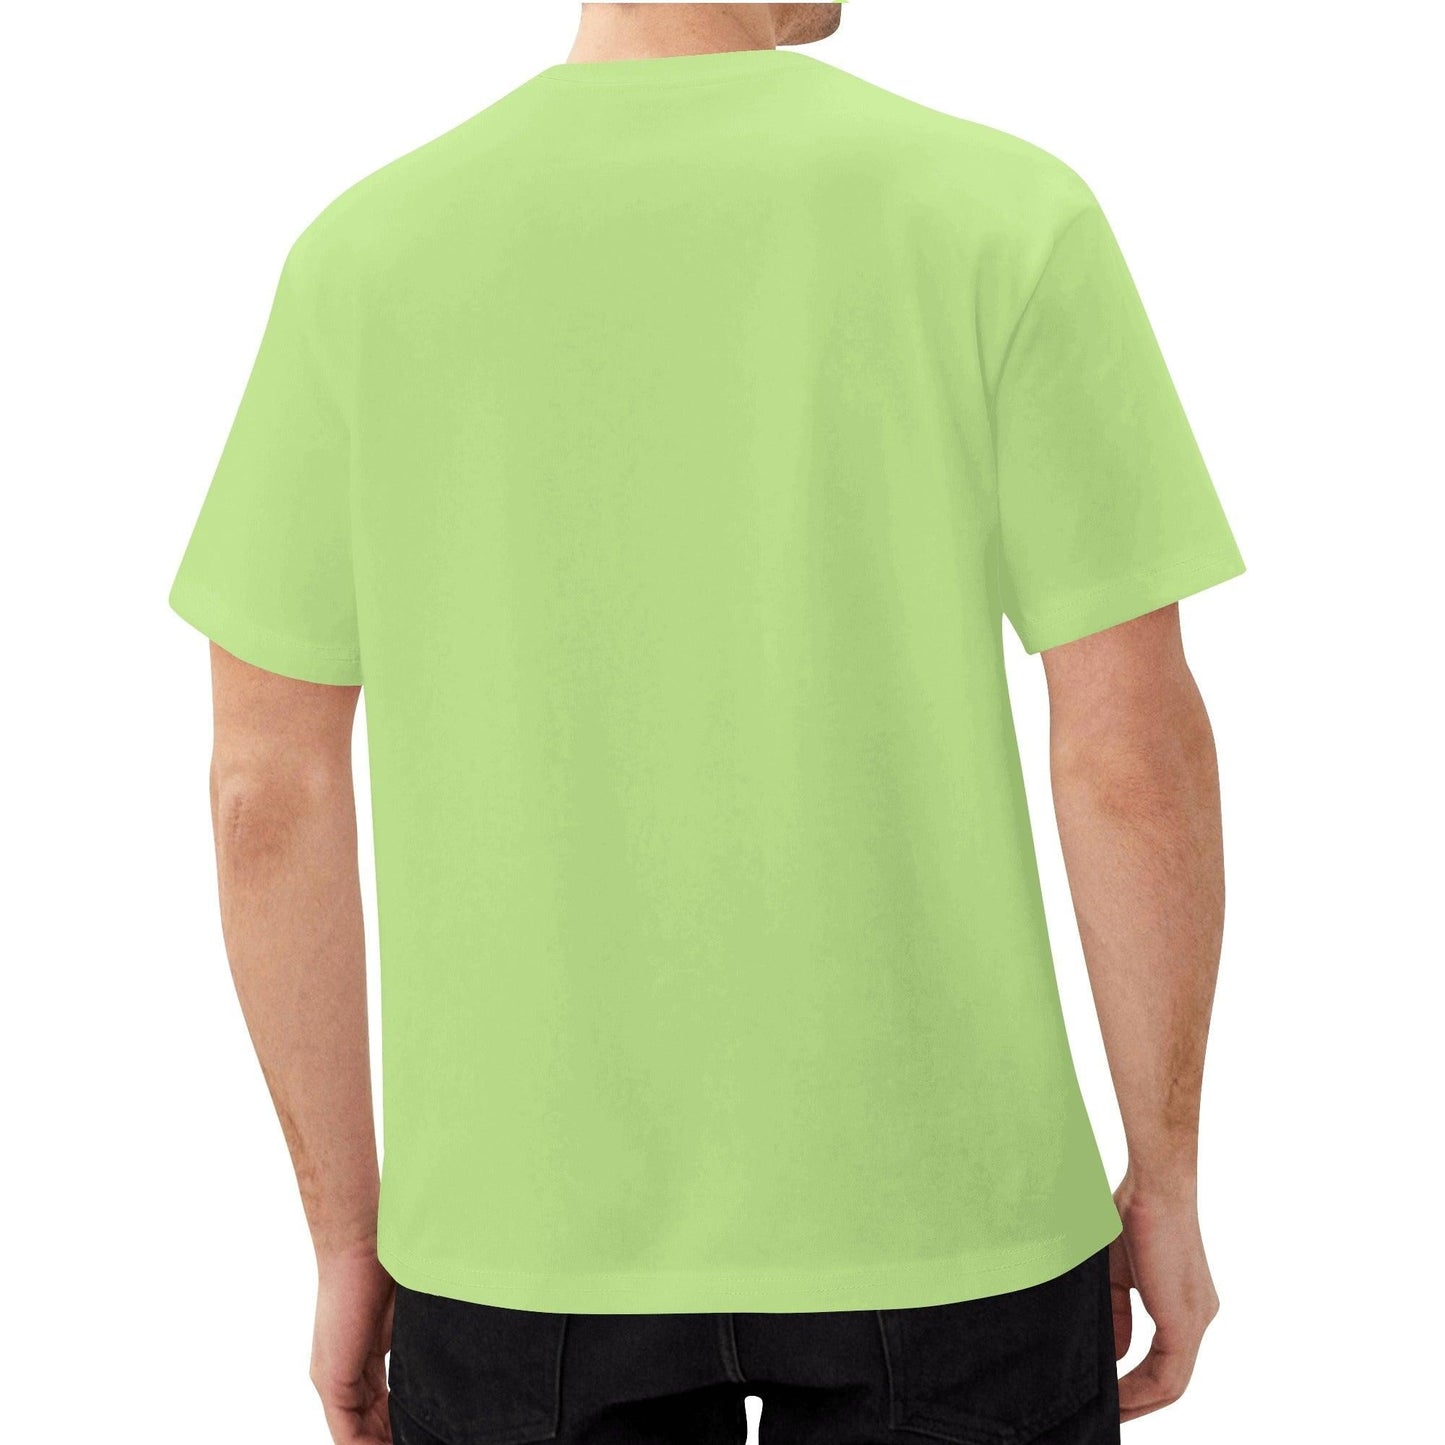 Cool Dude T-Shirt Green - NX Vogue New York | Luxury Redefined